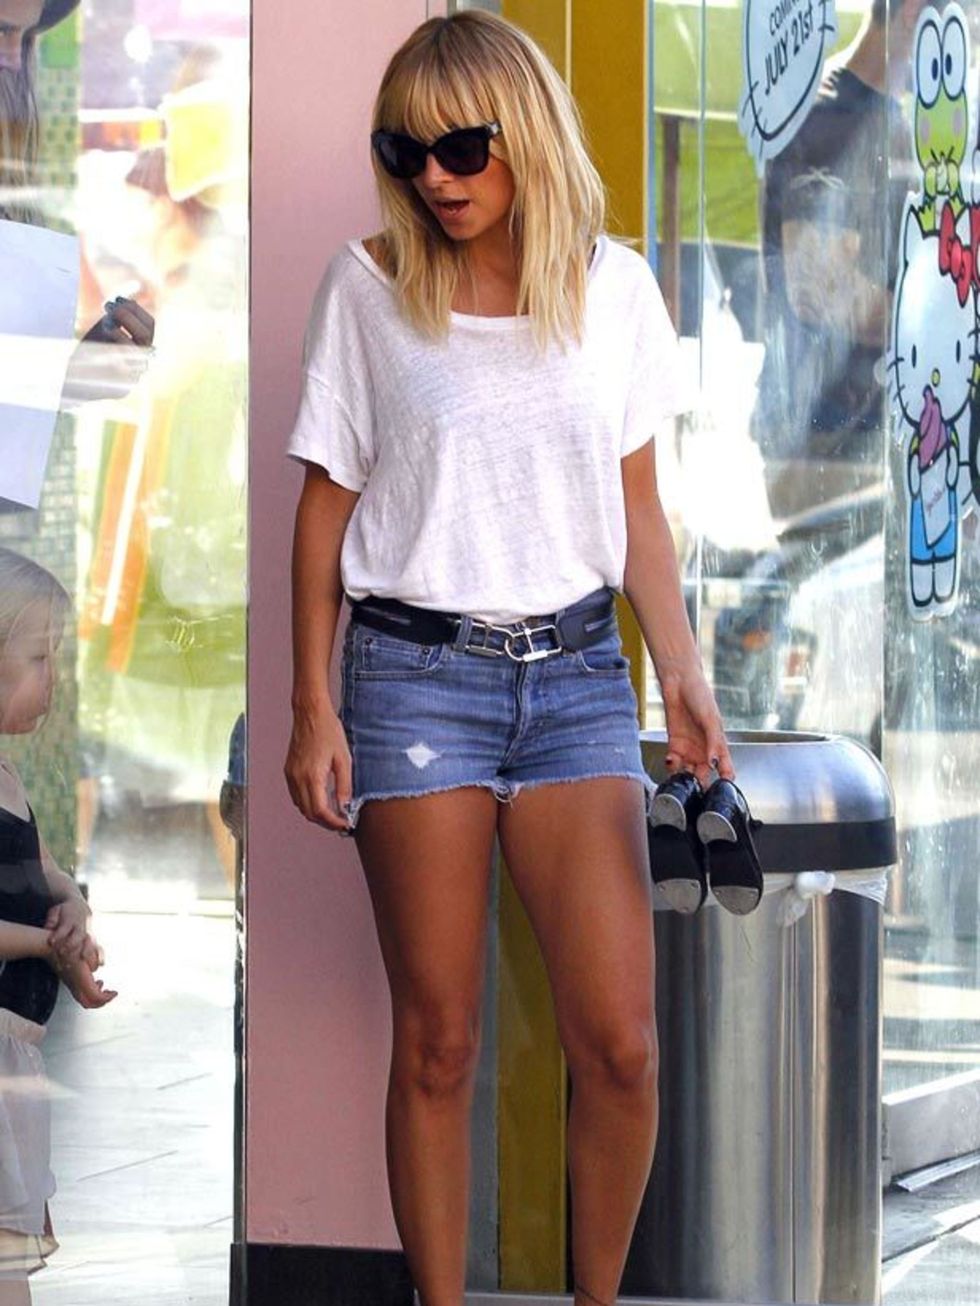 <p><a href="http://www.elleuk.com/starstyle/style-files/(section)/nicole-richie">Nicole Richie</a> works an off-duty LA look in a jersey tee teamed with denim shorts &amp; Giacomorelli loafers, October 2011</p>